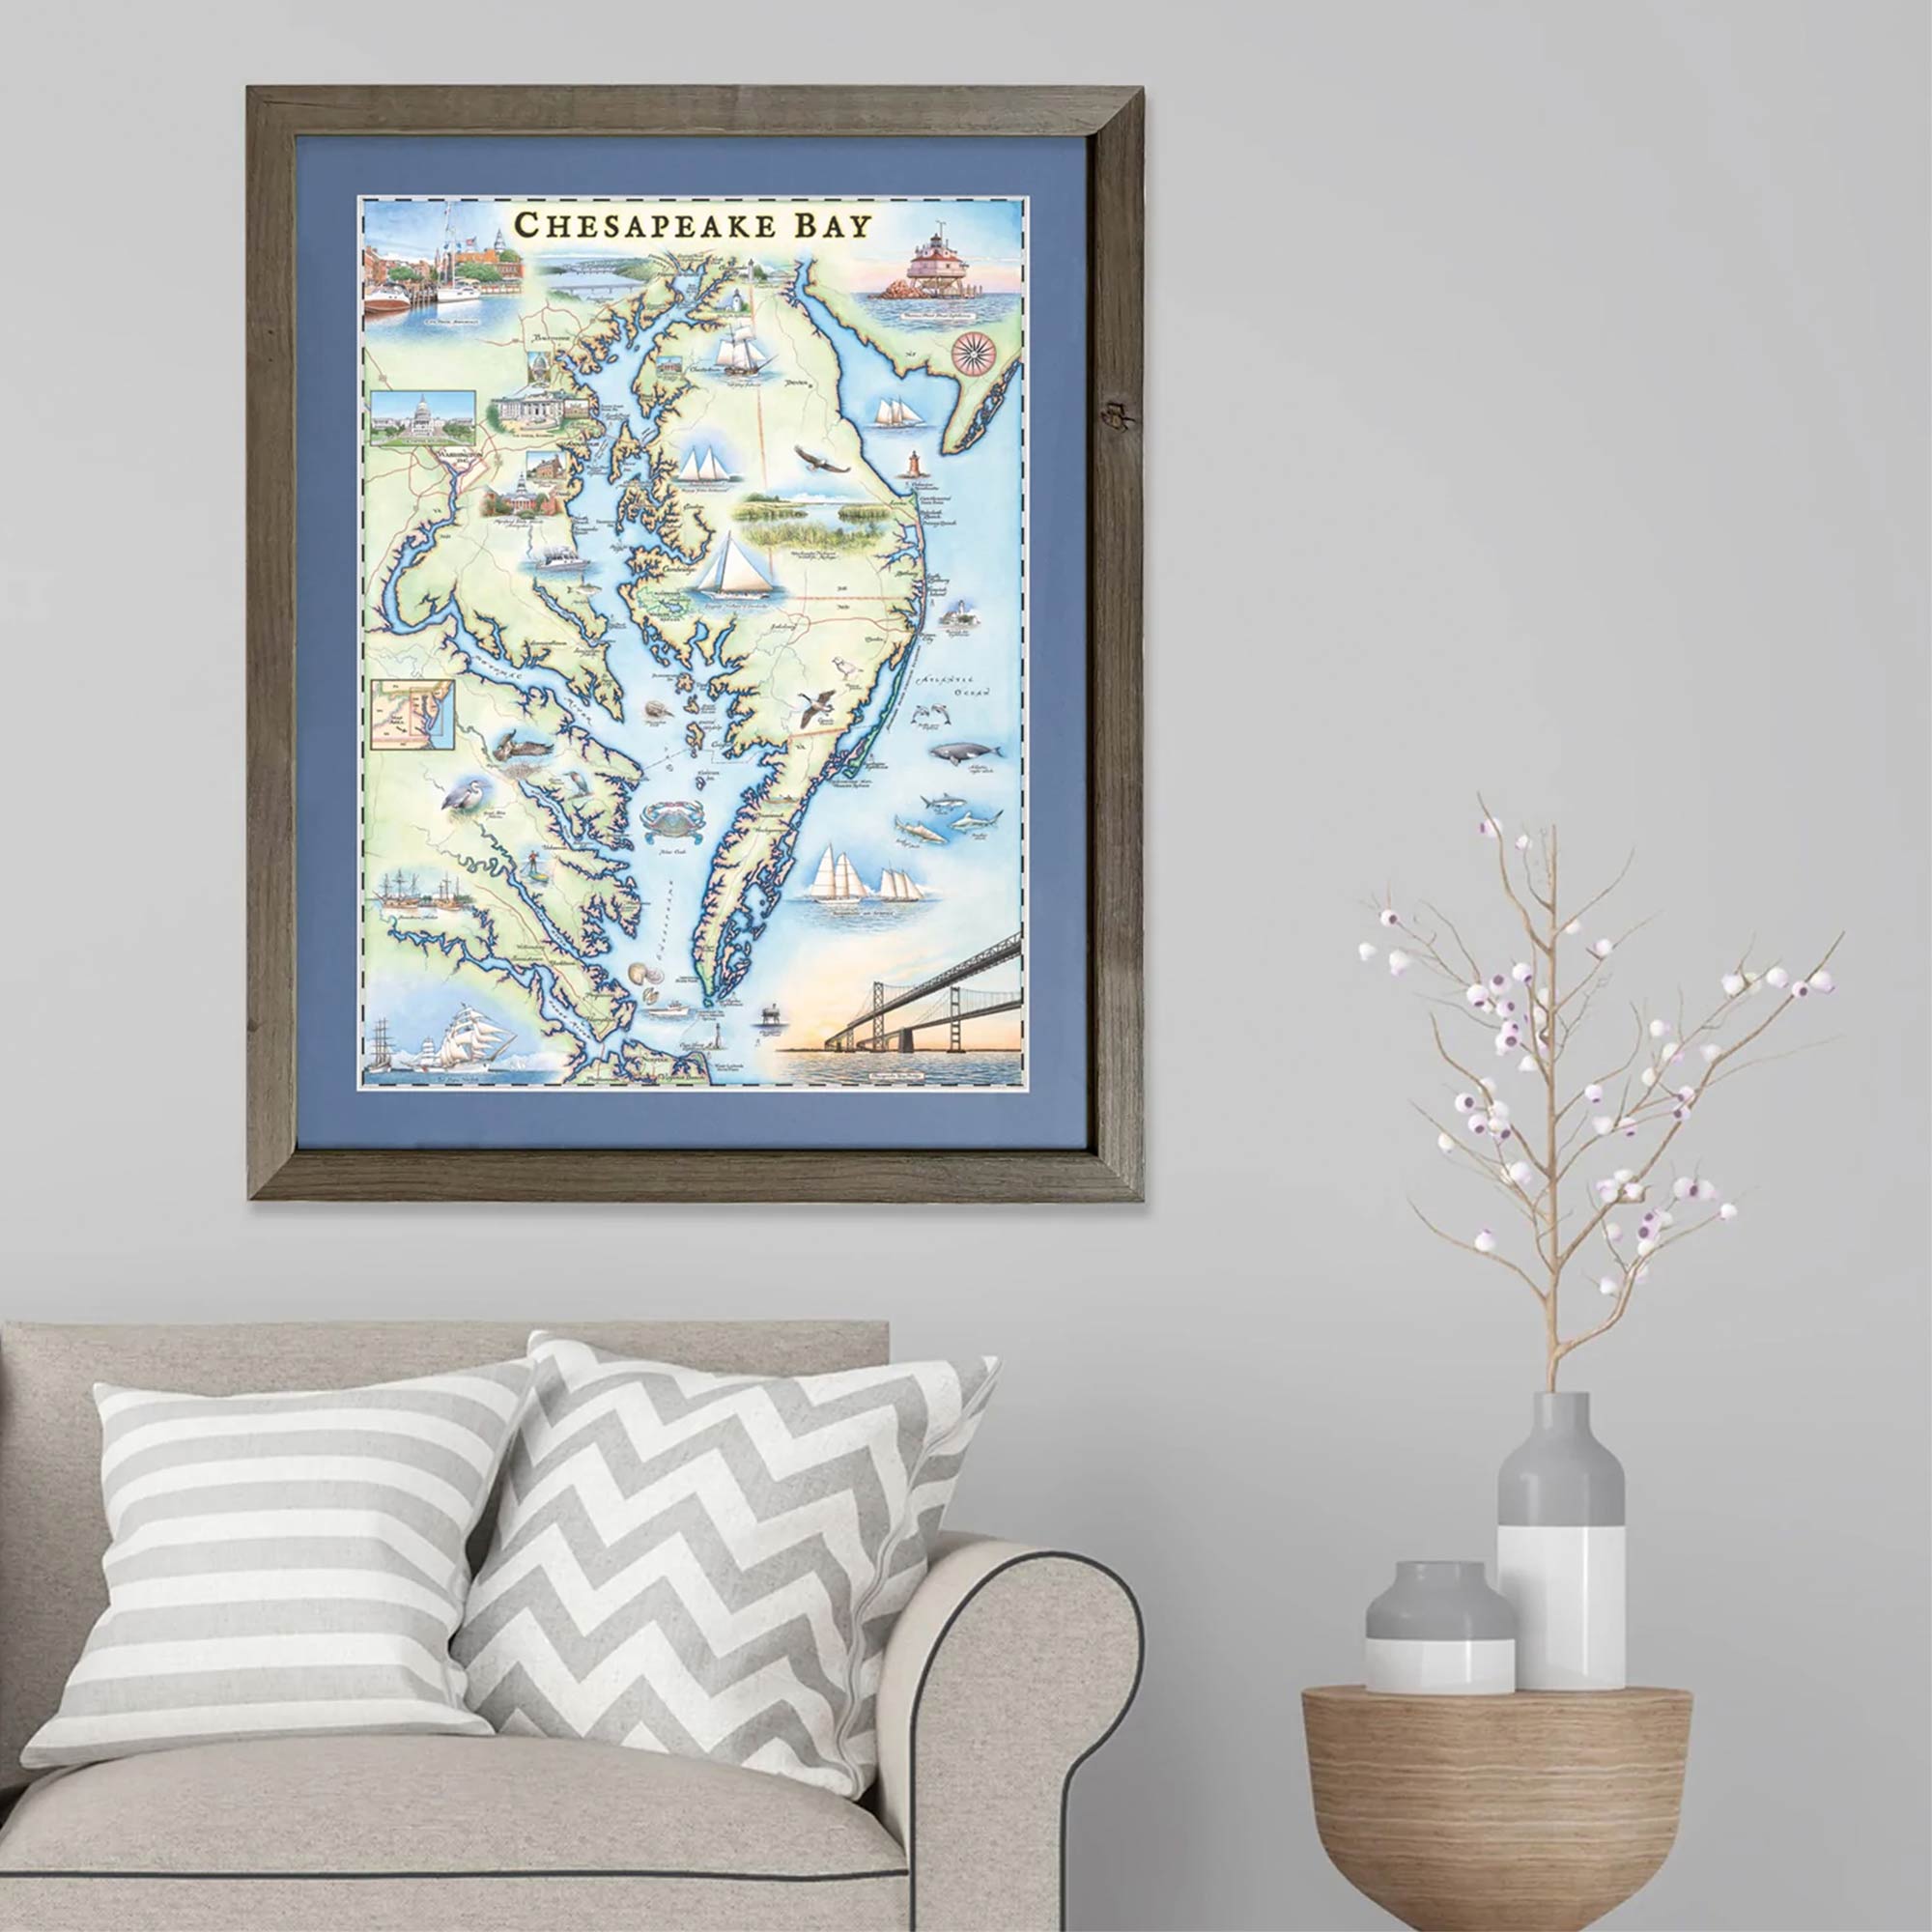 Chesapeake Bay map un a grey frame with blue mat hanging over a couch.